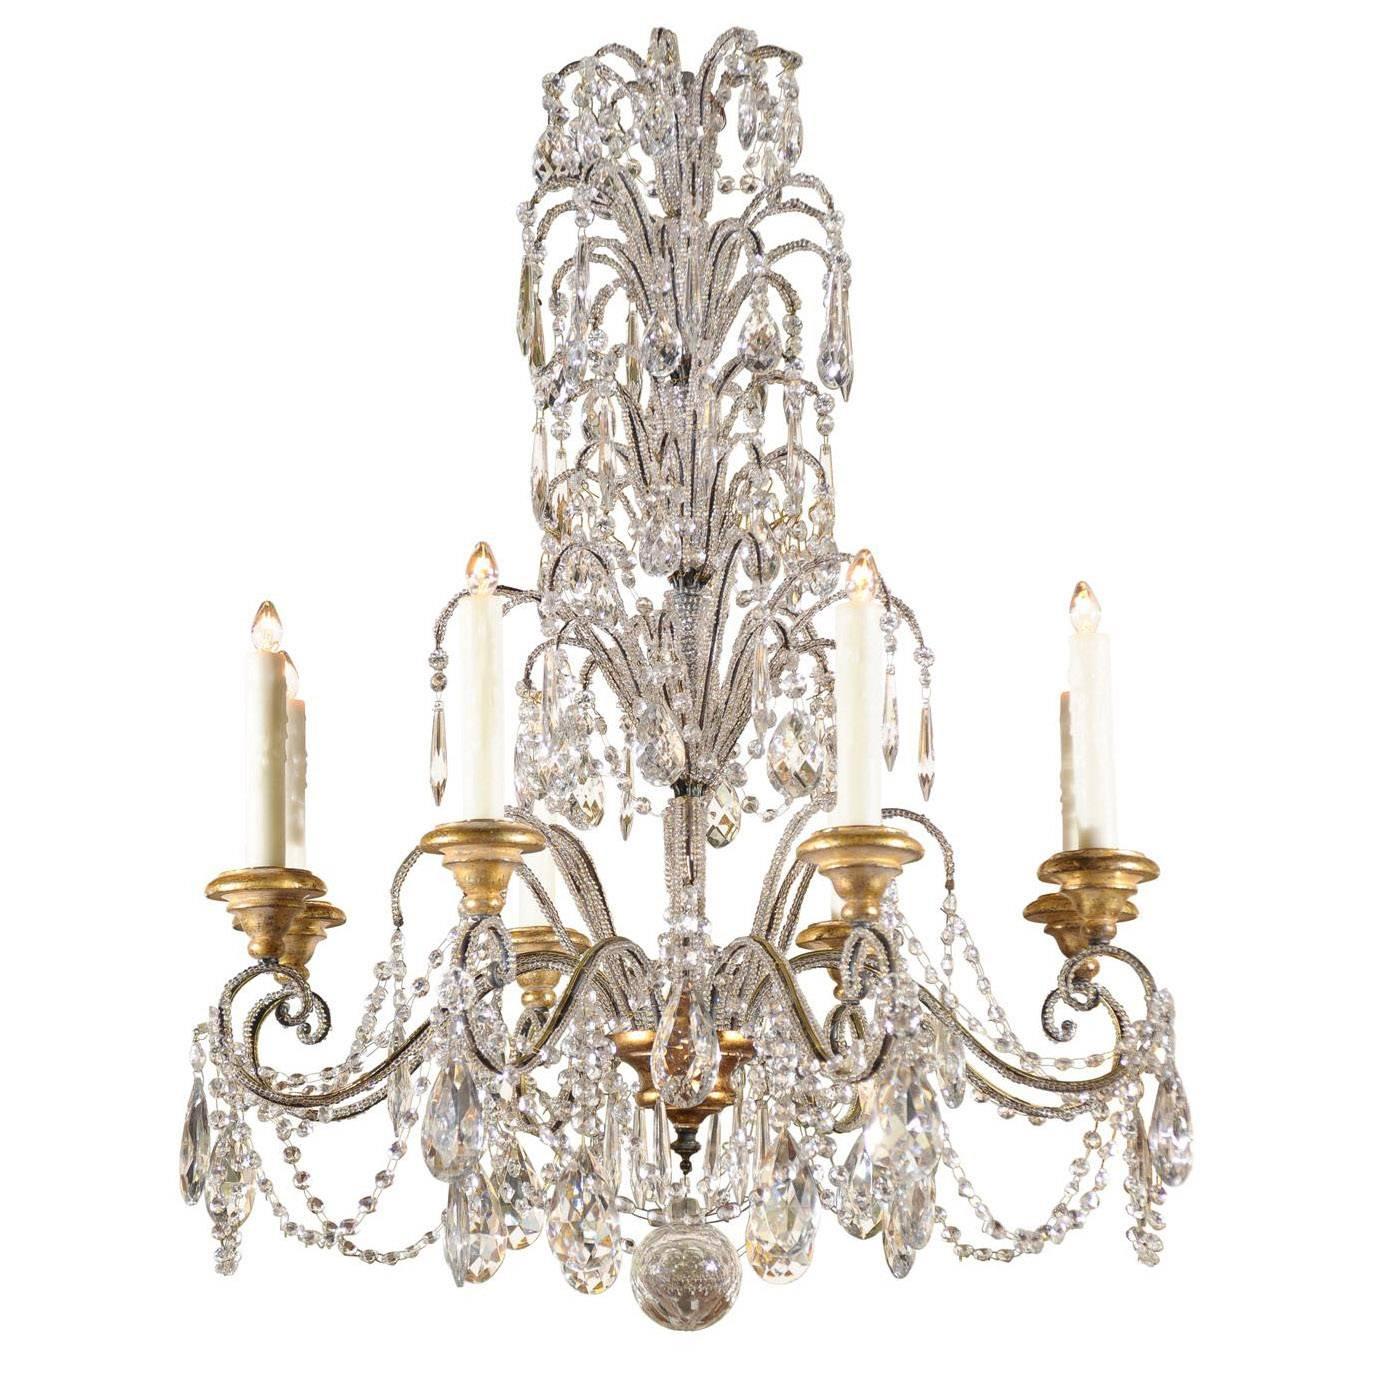 Italian Crystal Eight-Light Chandelier with Beaded Arms and Giltwood Bobèches